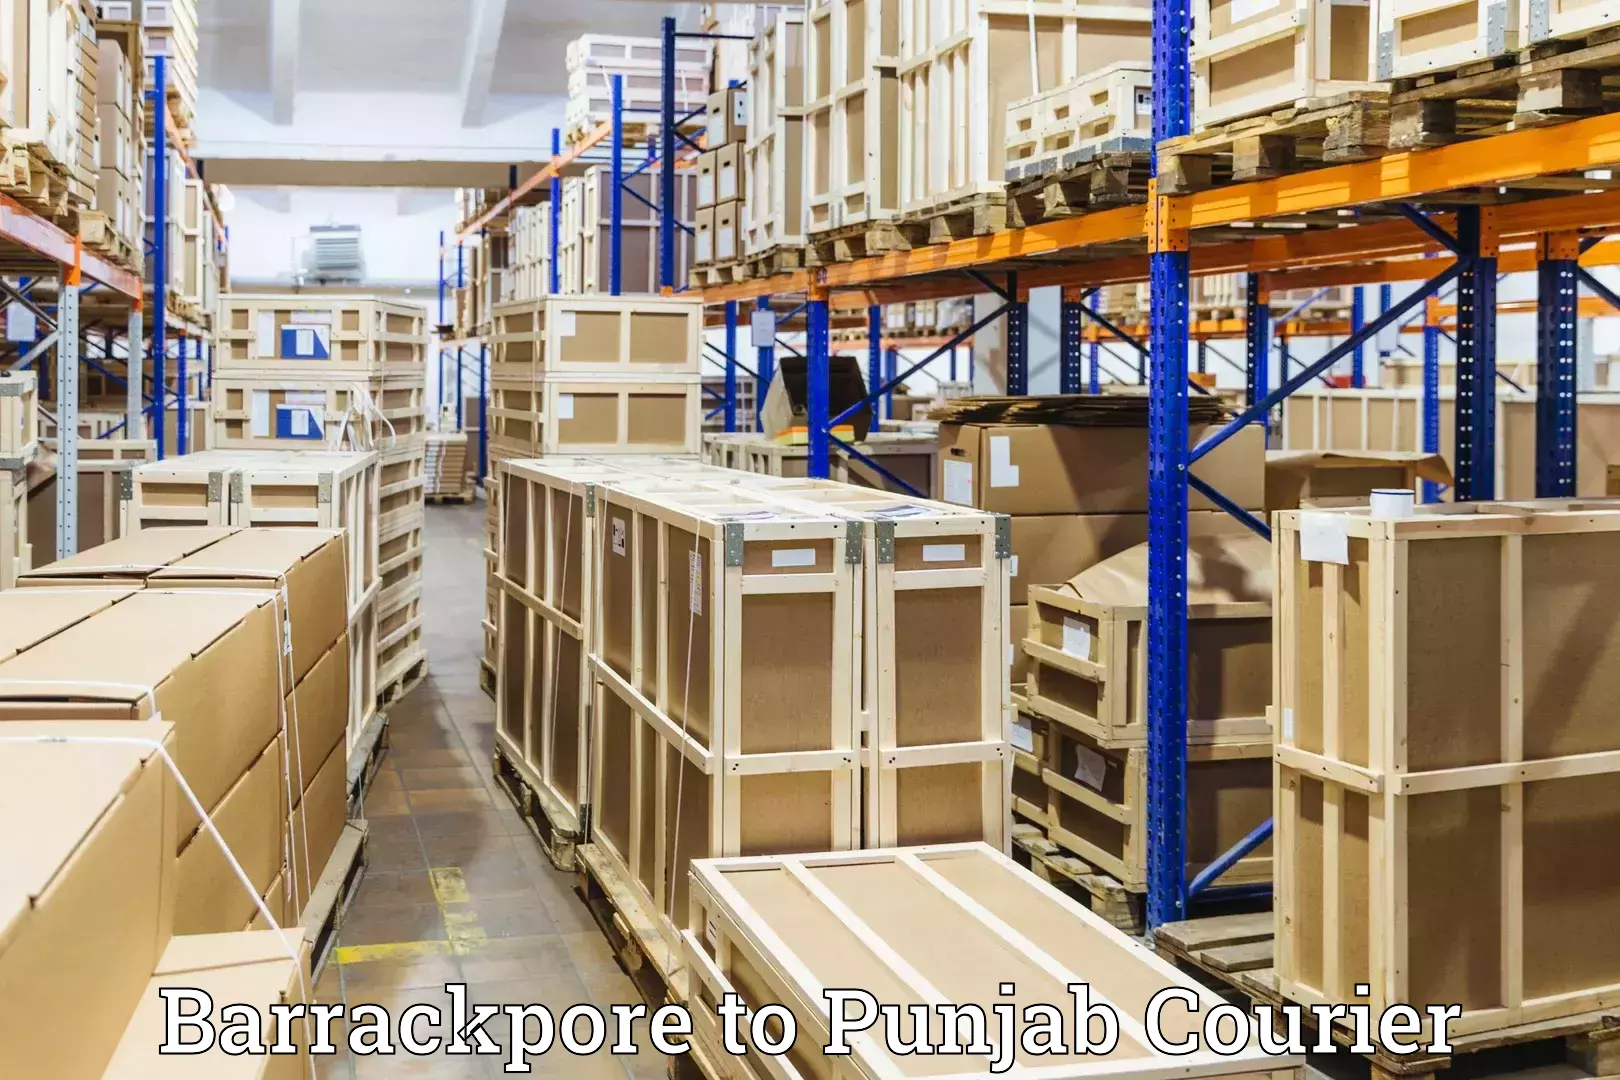 Hassle-free luggage shipping Barrackpore to Patiala